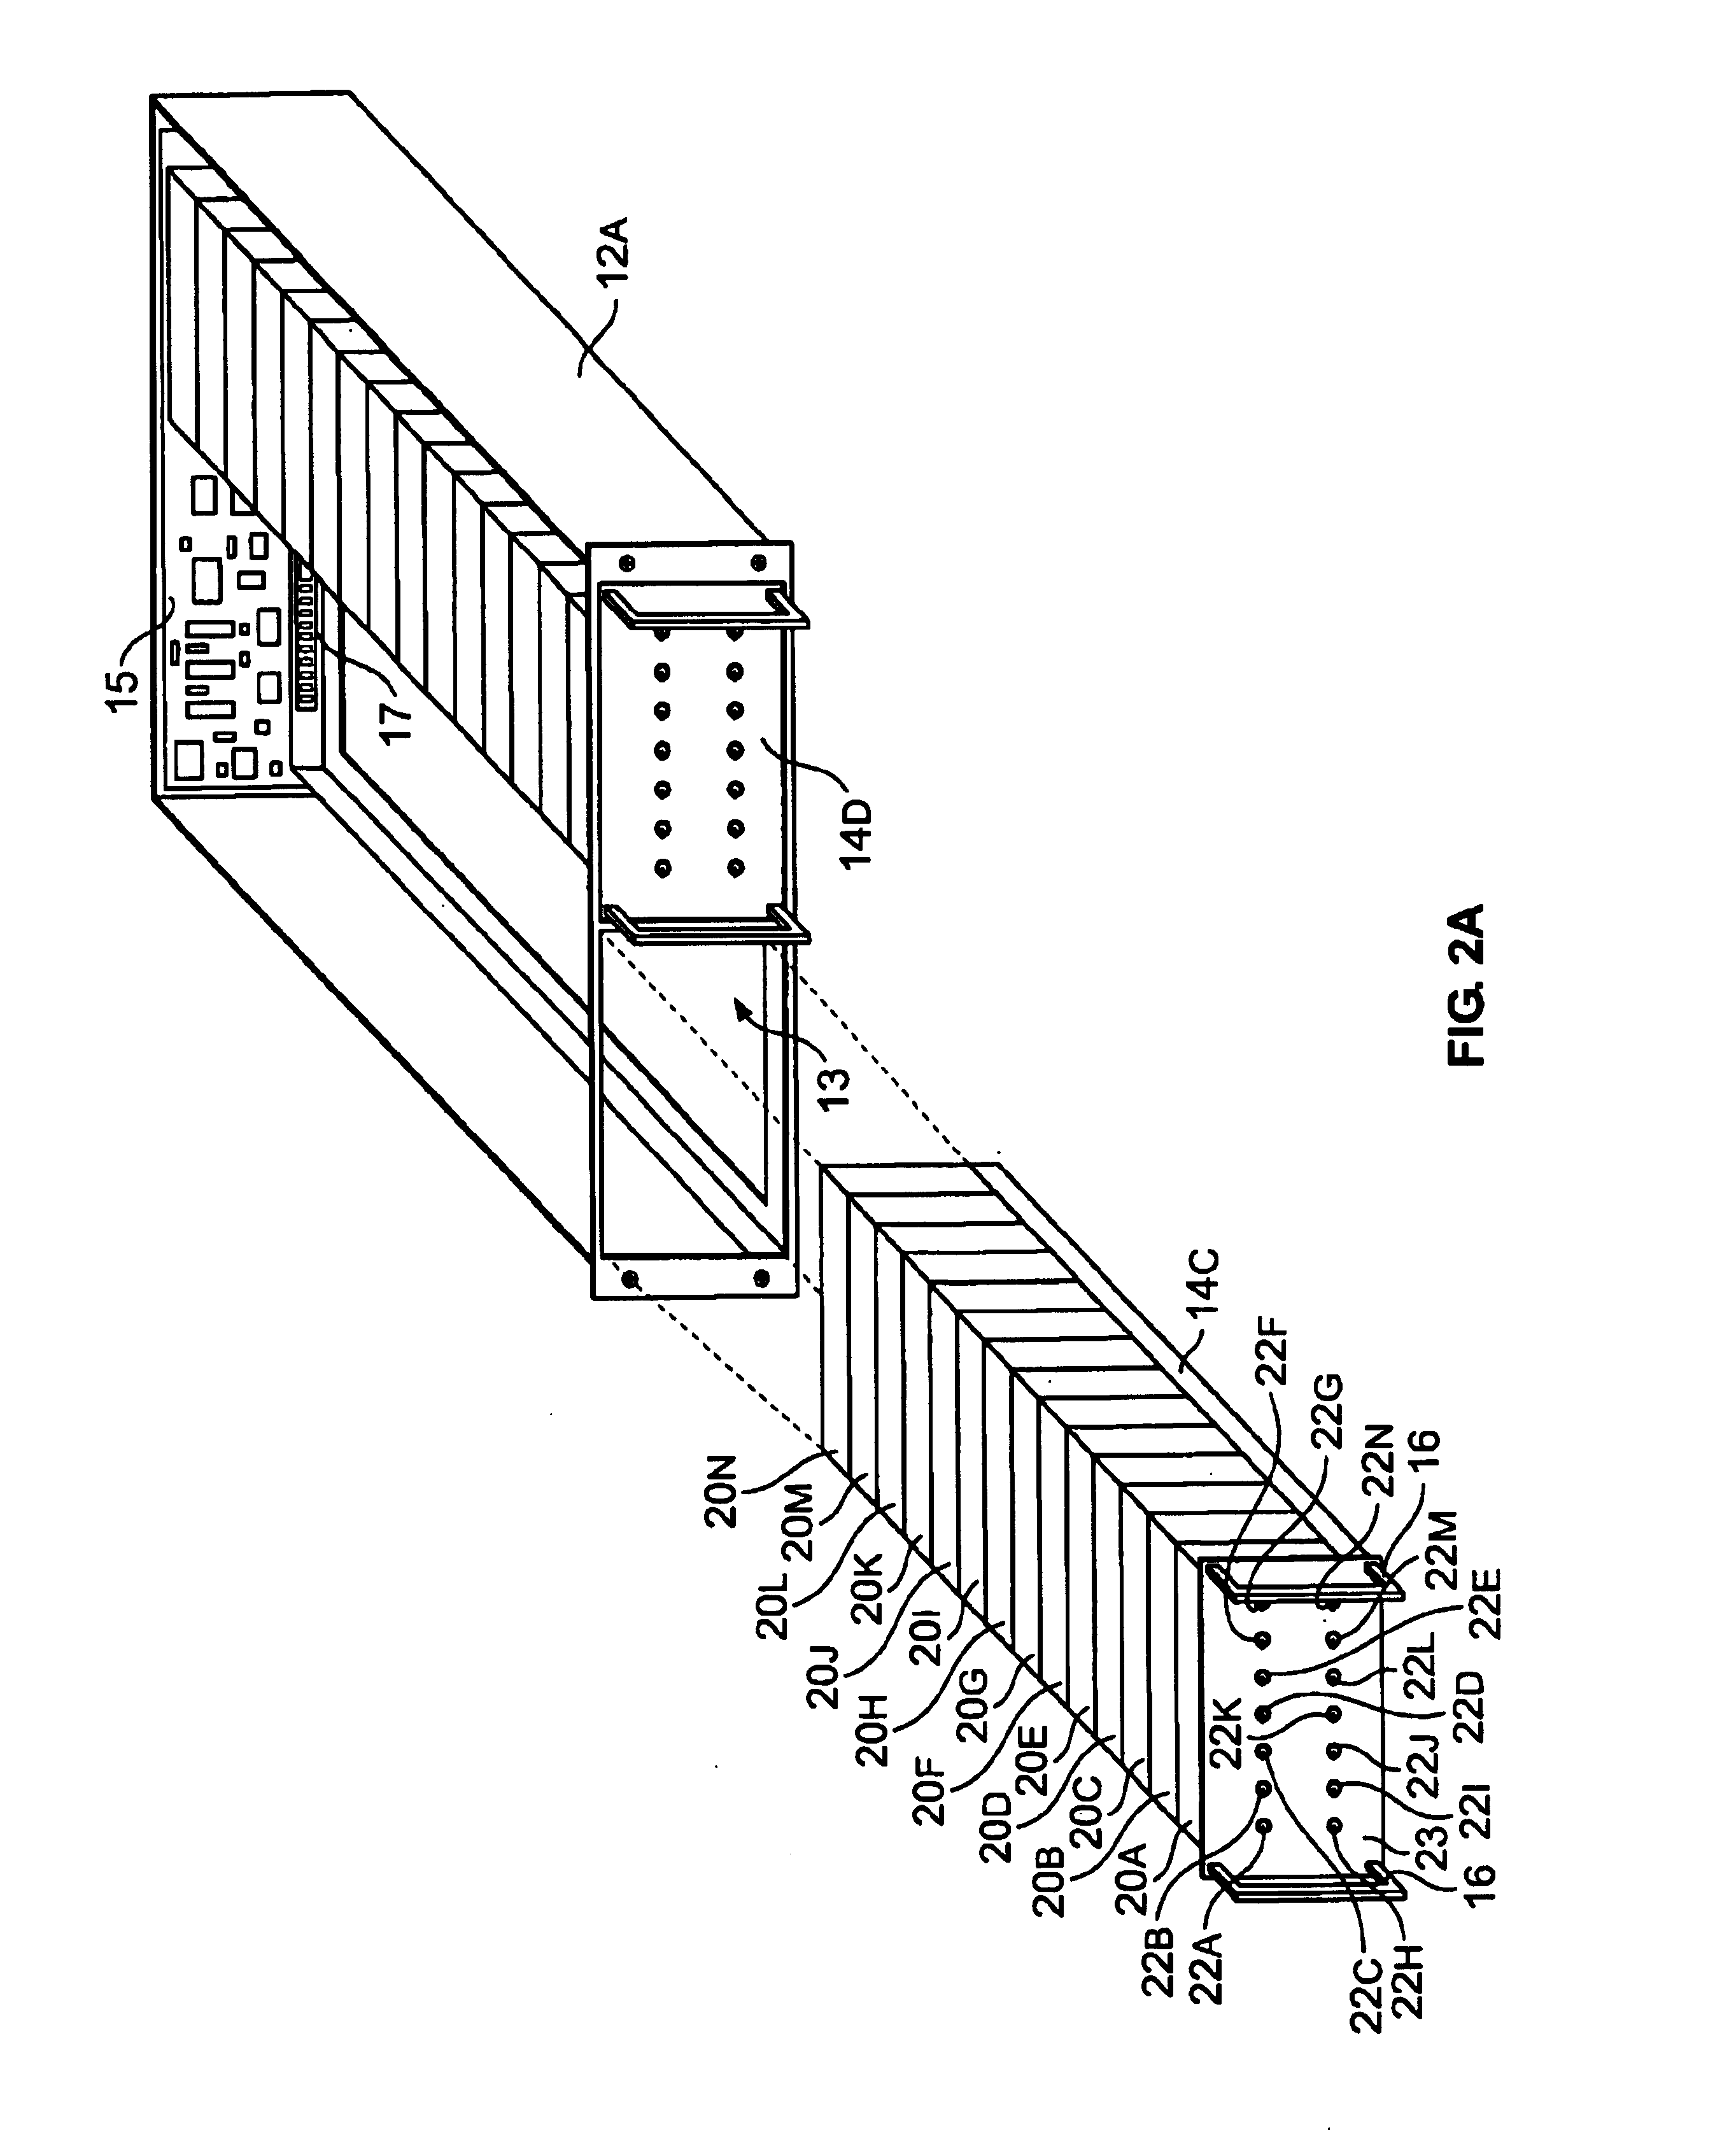 Removable disk storage array emulating tape library having backup and archive capability